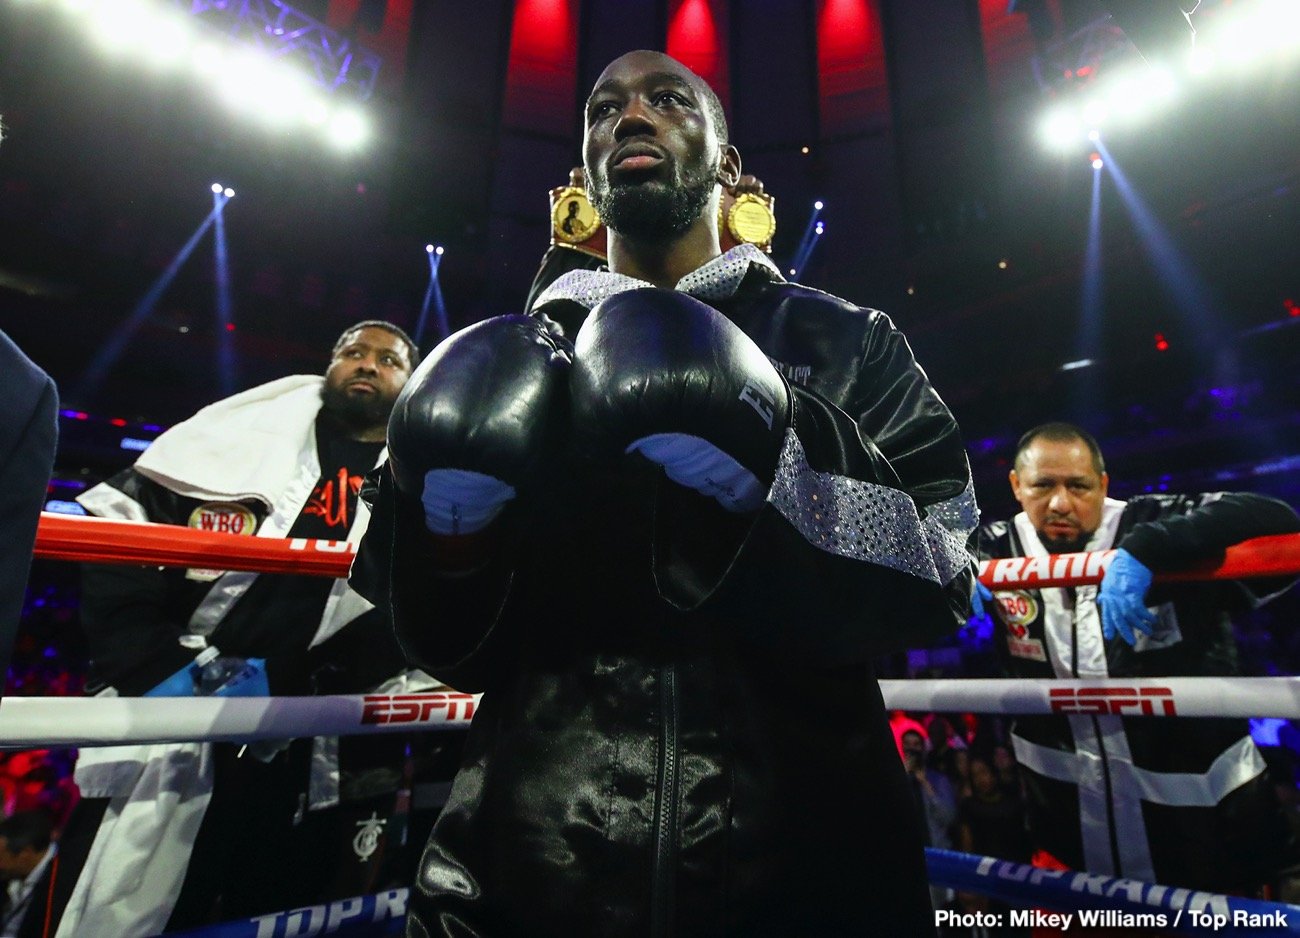 Image: Crawford must fight Boots Ennis or Spence in 2023 or vacate WBO belt